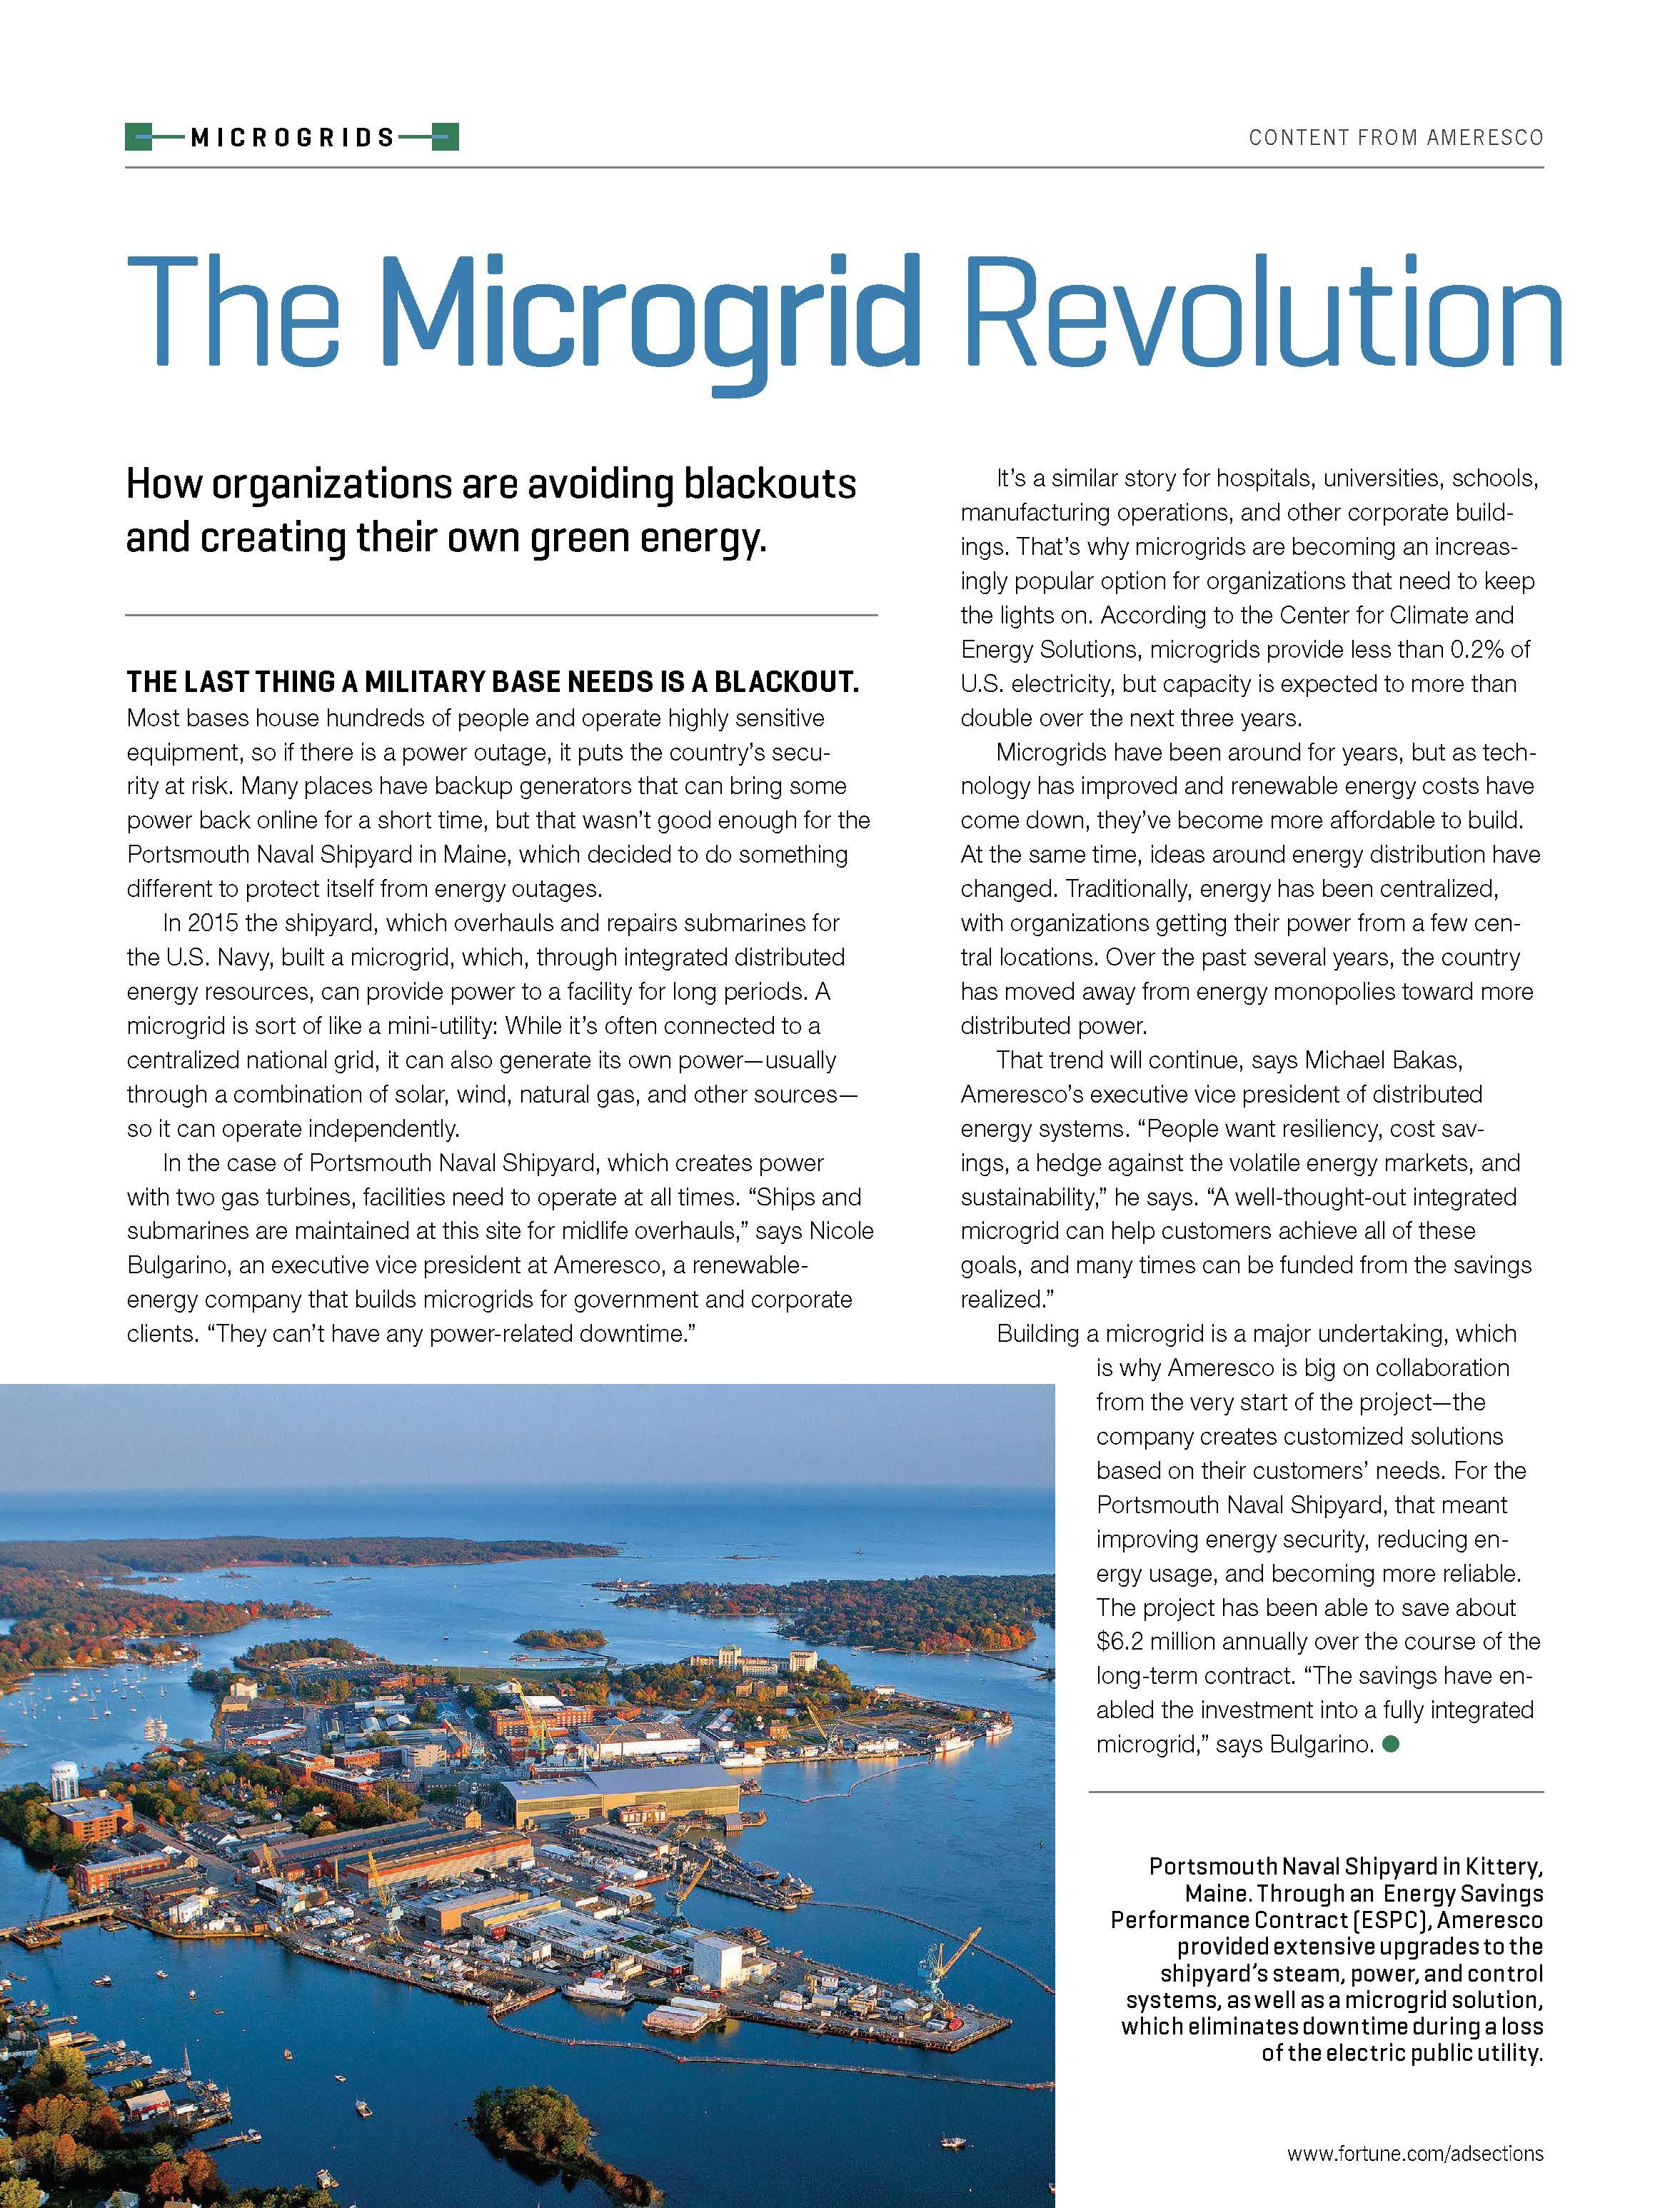 Page from an issue of Fortune magazine discussing microgrid energy systems.